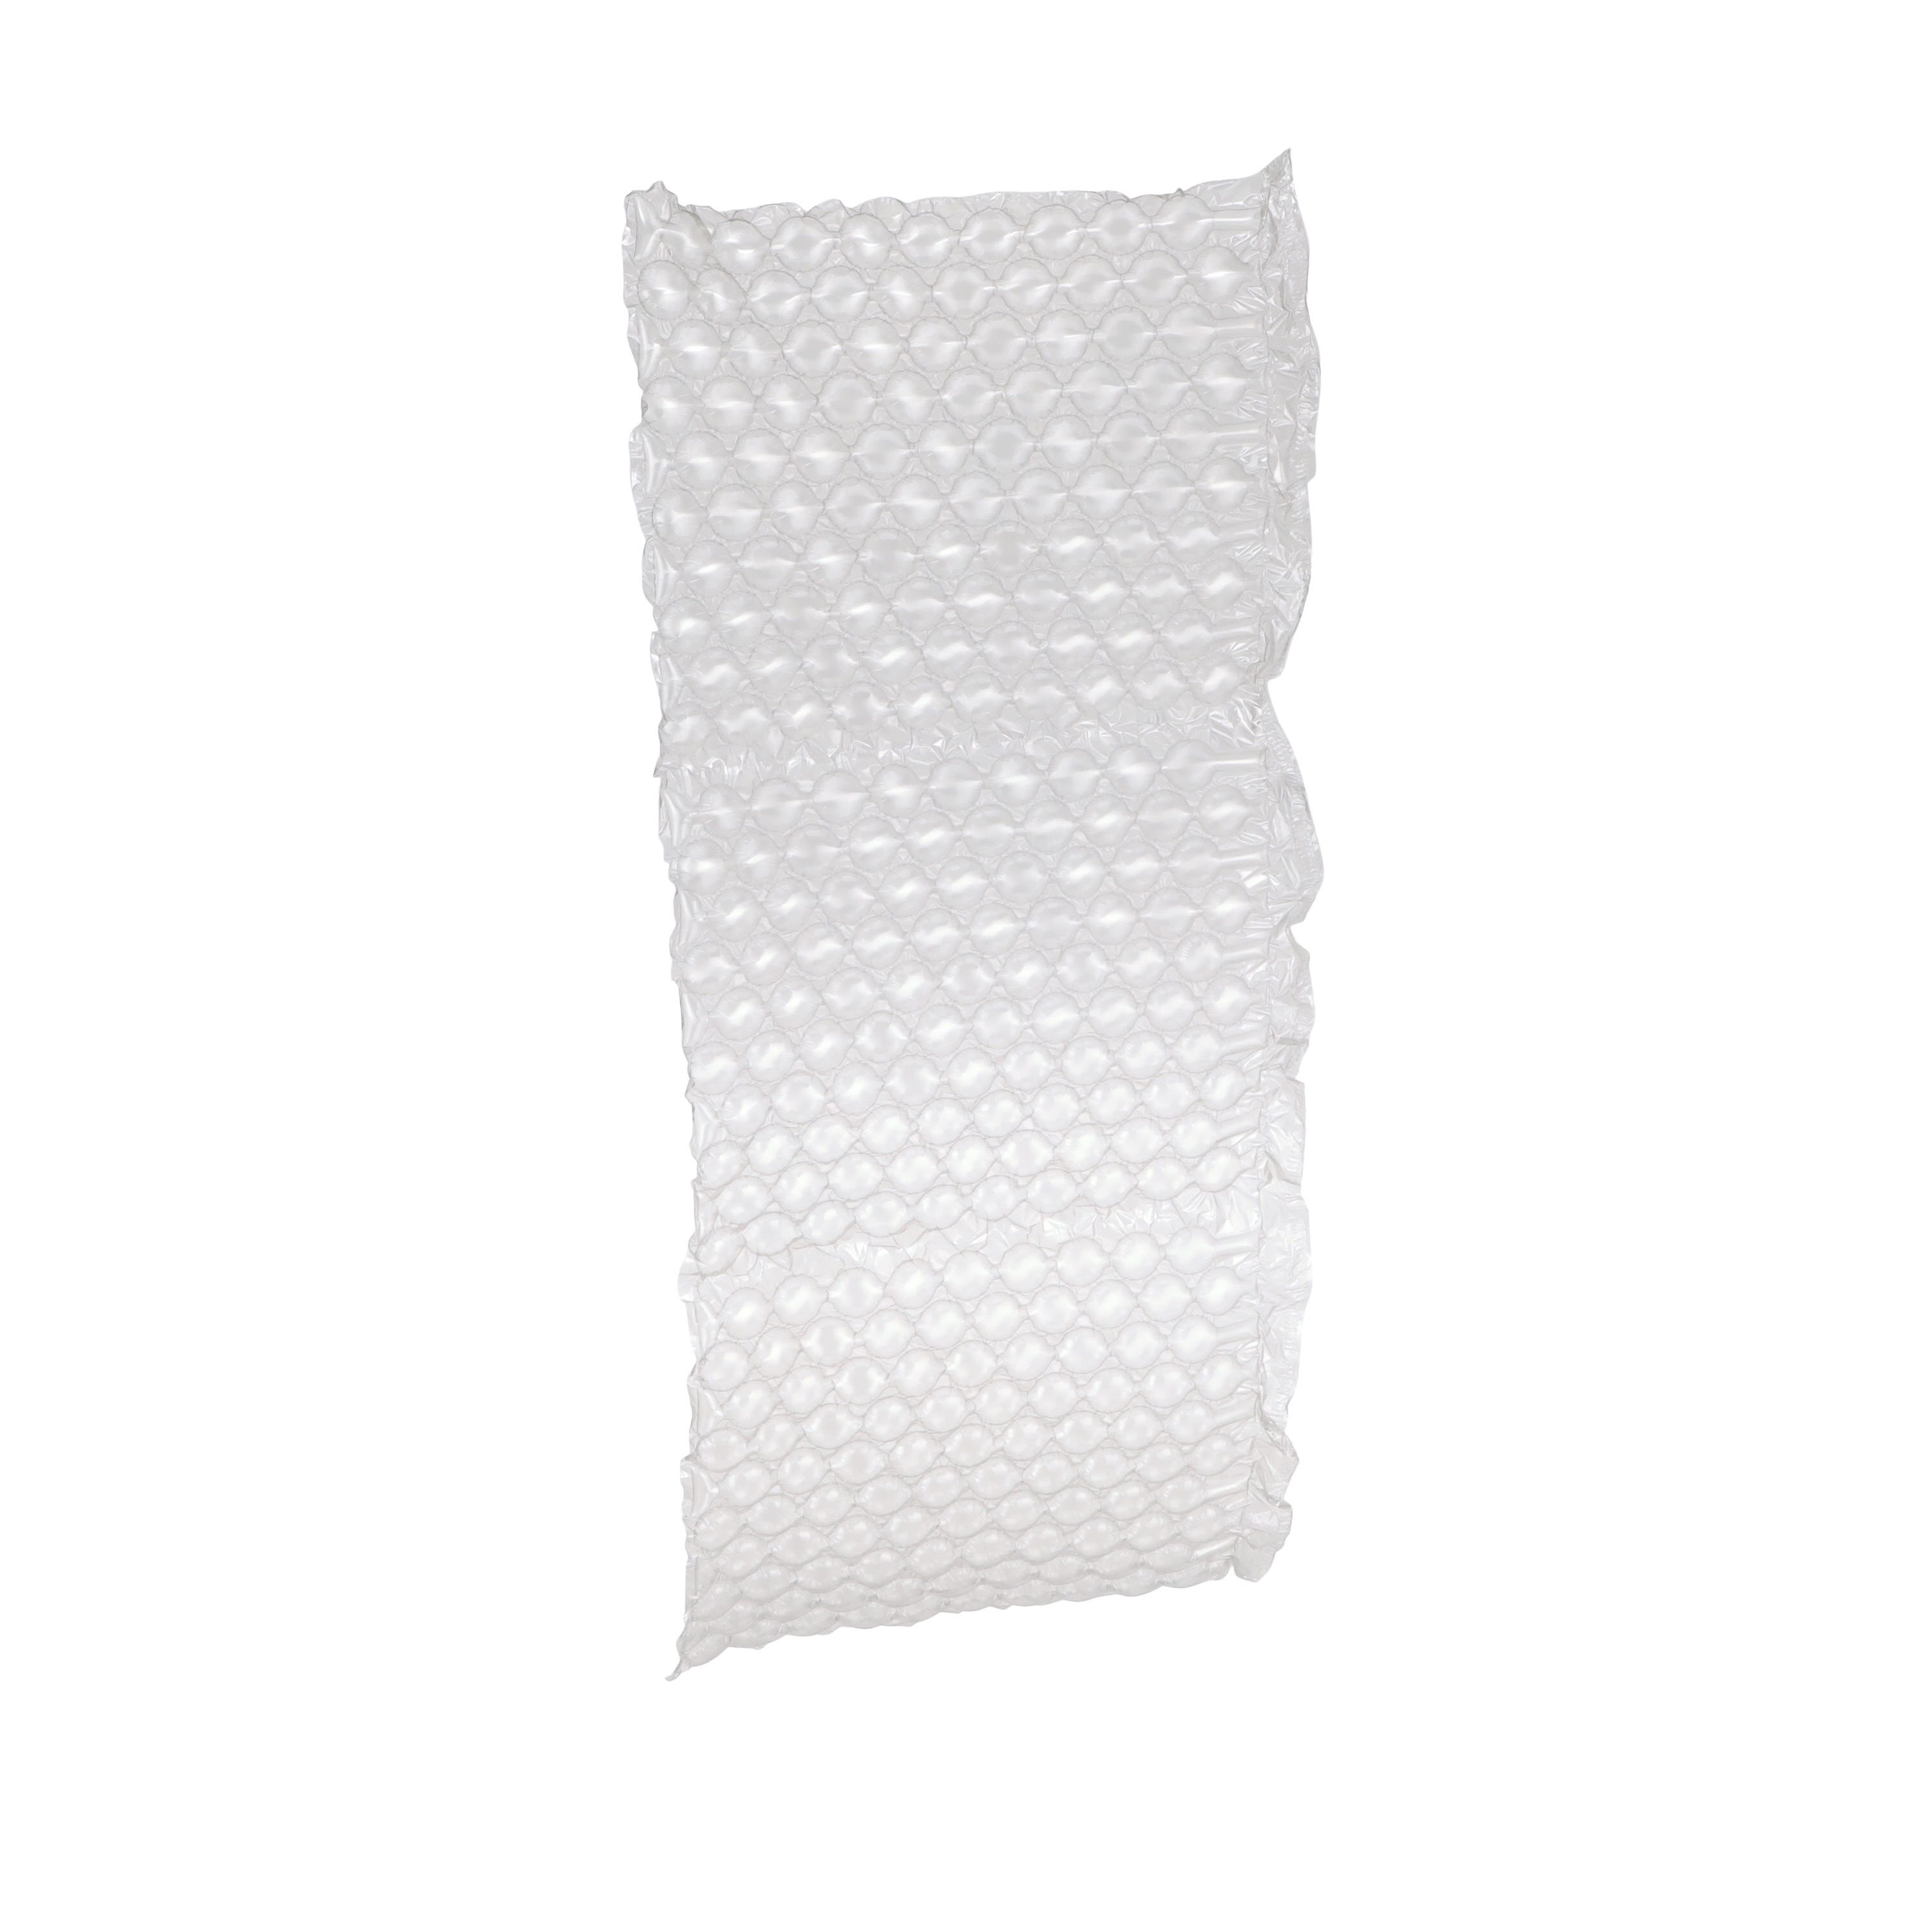 bubble wrap products